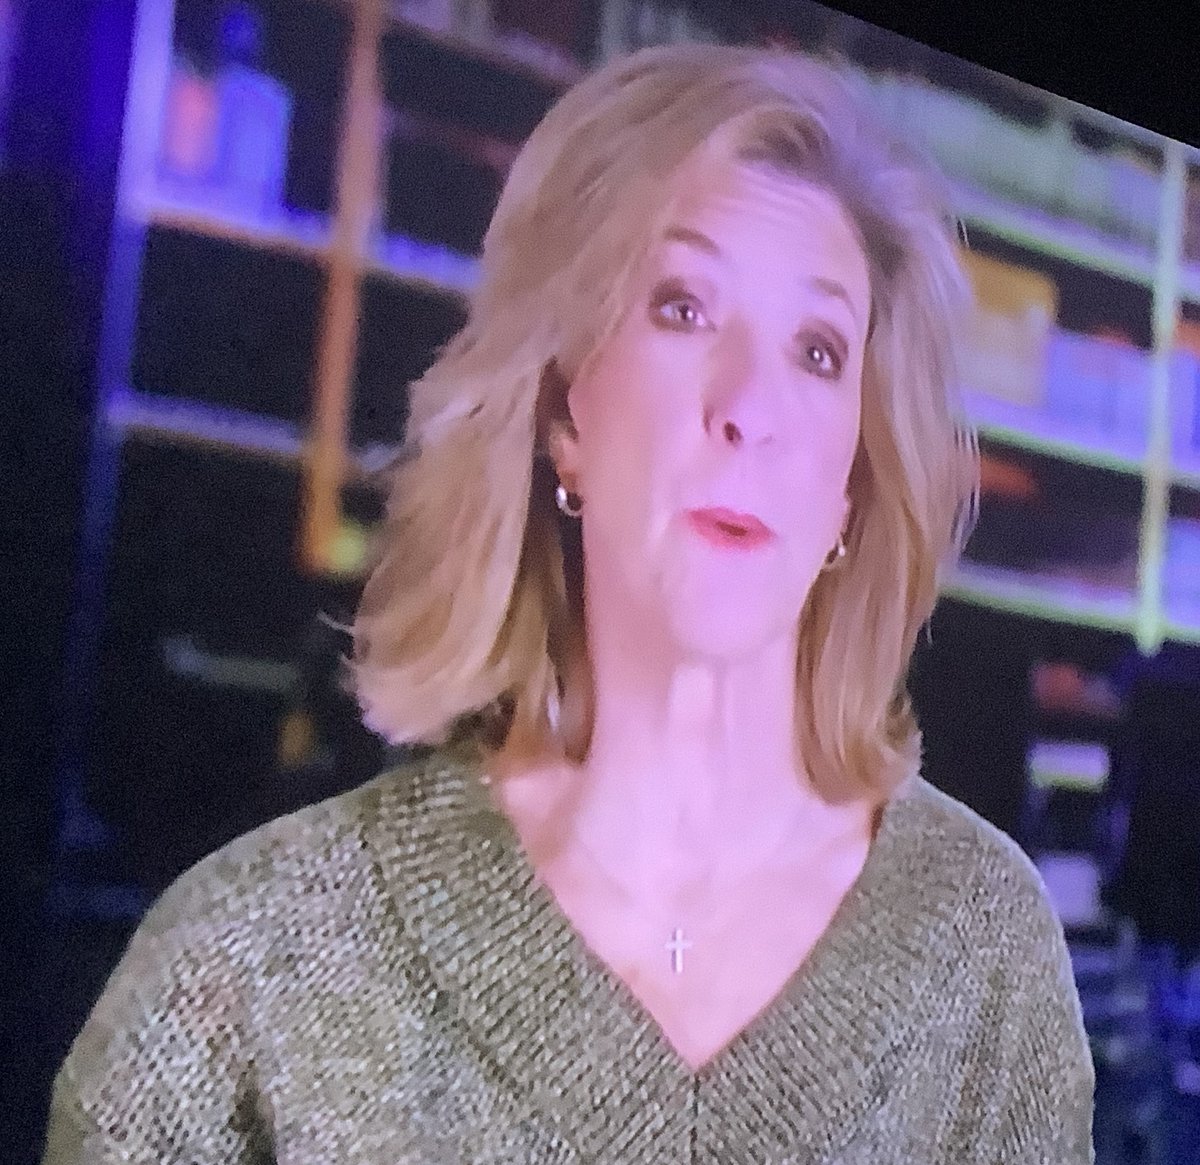 @SieglerKelly #ColdJustice Every Case this Beautiful Lady and the Team she works with work on and solve a number of cases you just have so much RESPECT AND ADMIRATION for her ❣️